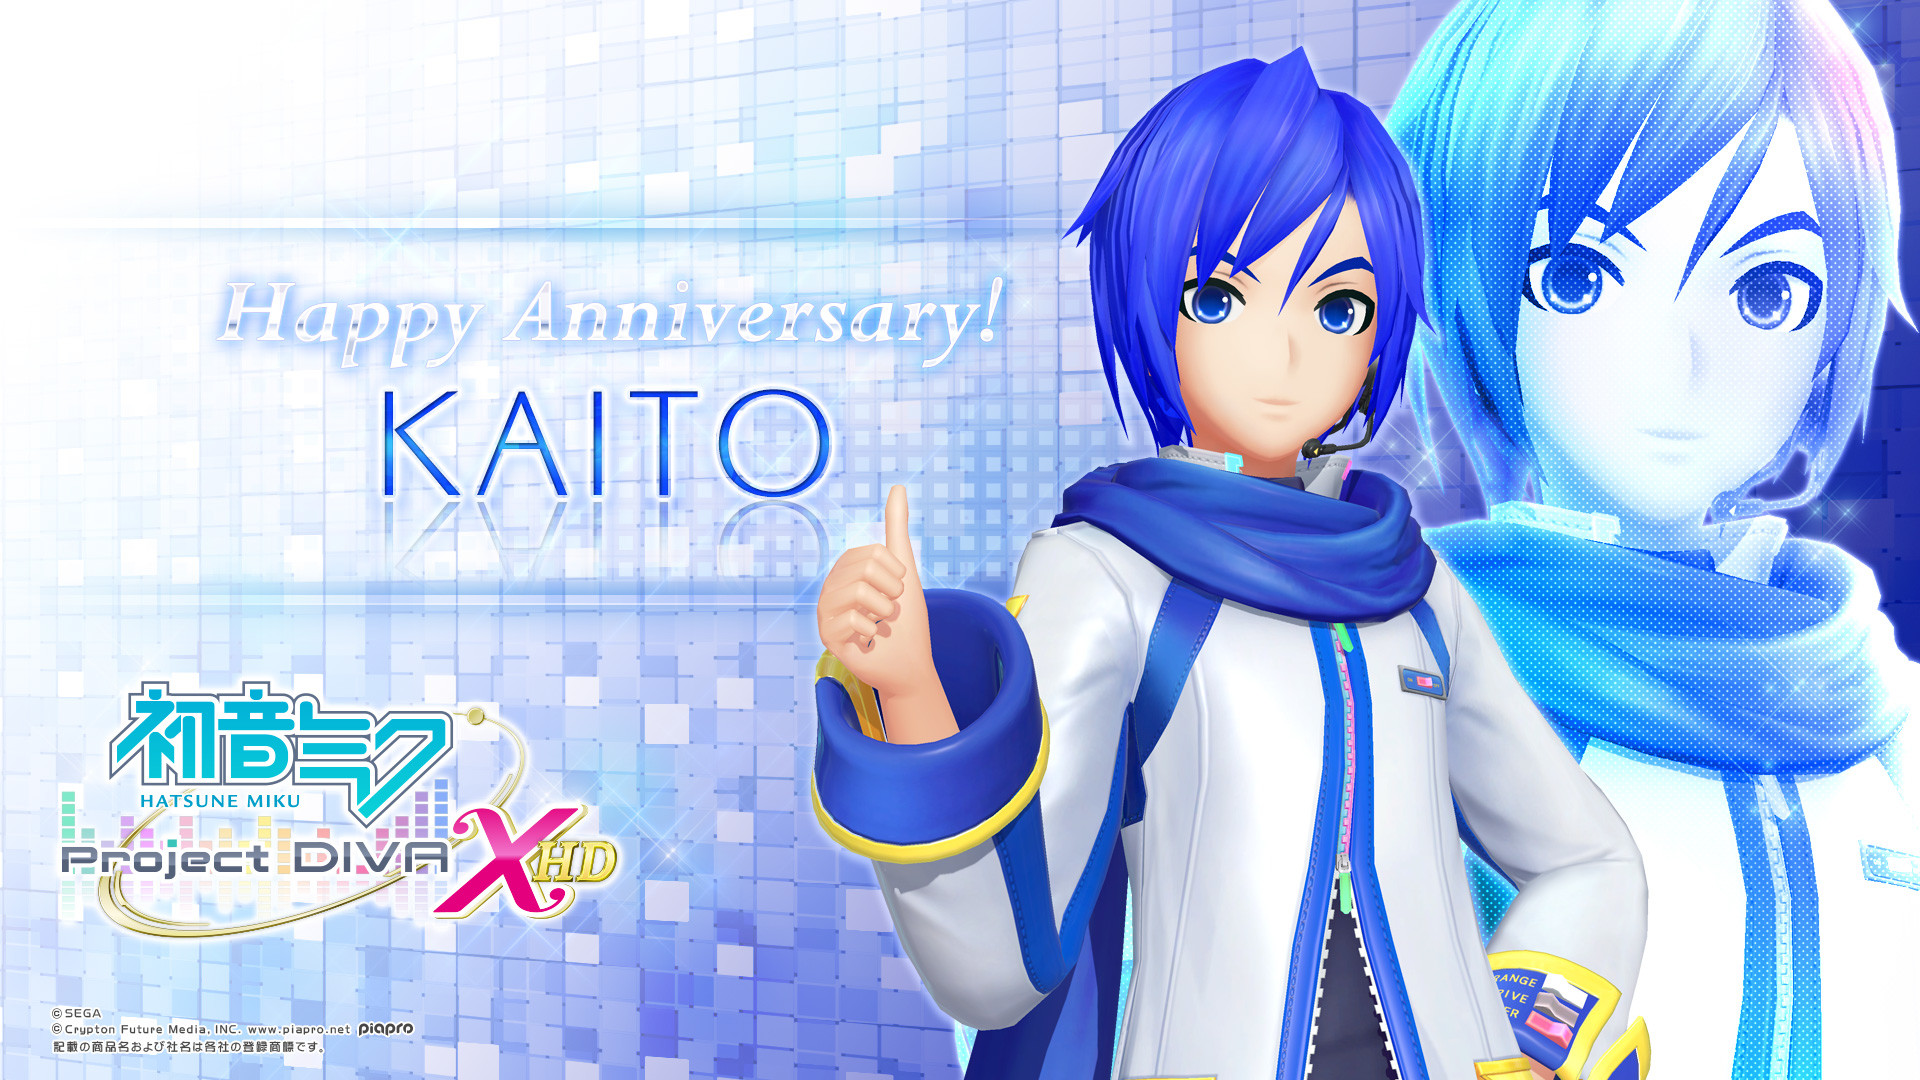 1920x1080 As always, SEGA celebrates Crypton VOCALOID birthdays with some sweet  wallpapers. There are two wallpapers available, both featuring KAITO V3  modules.